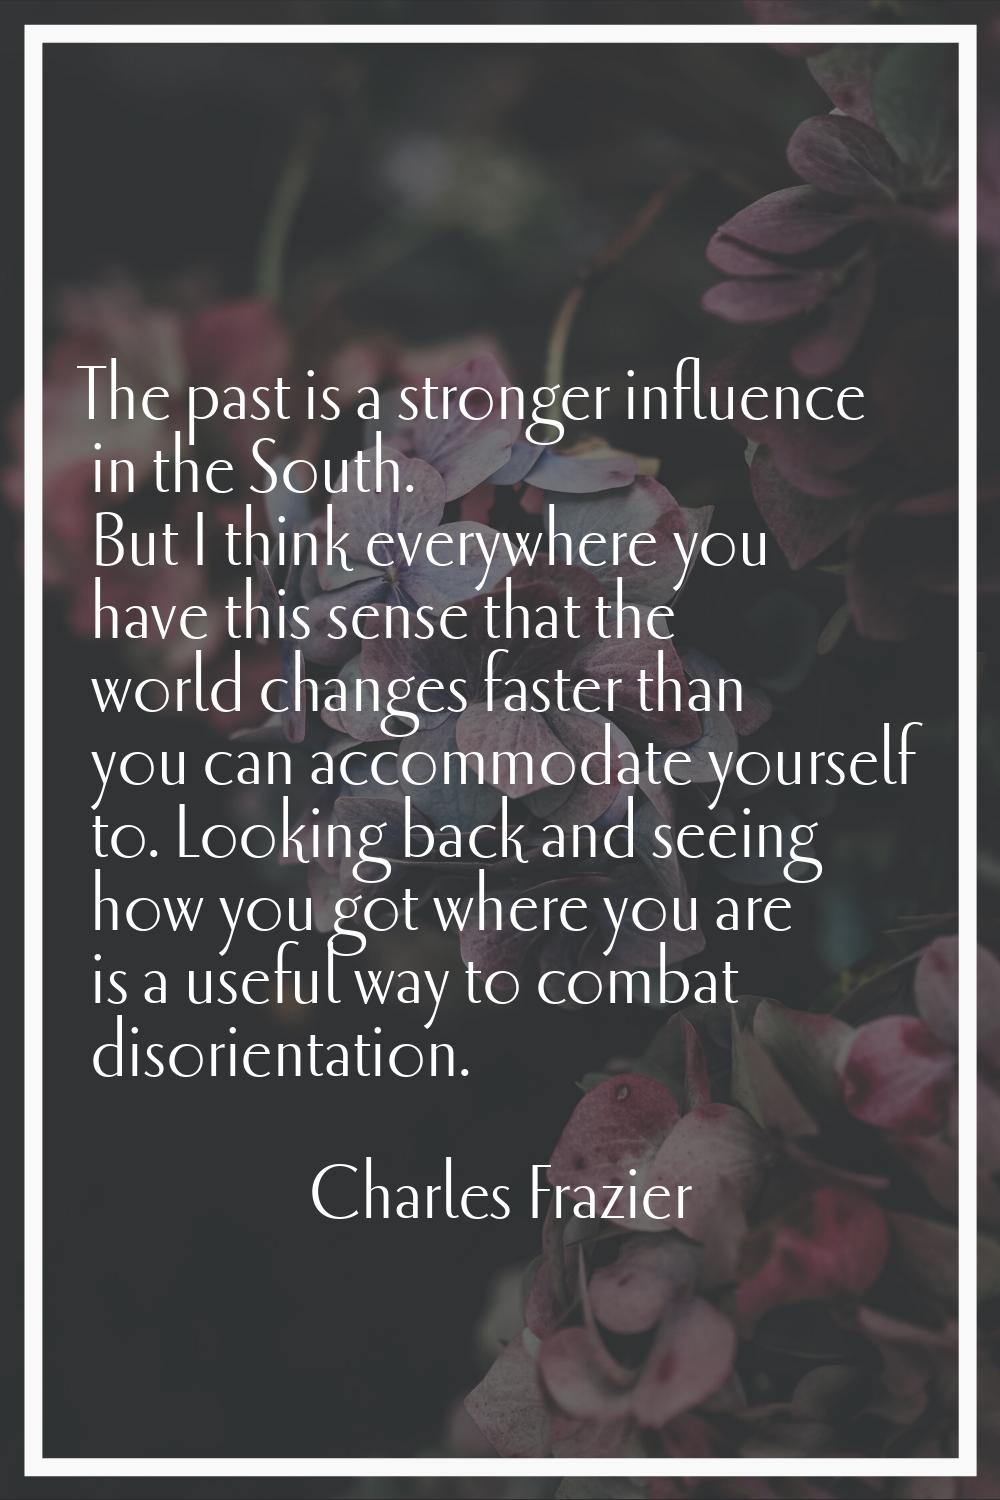 The past is a stronger influence in the South. But I think everywhere you have this sense that the 